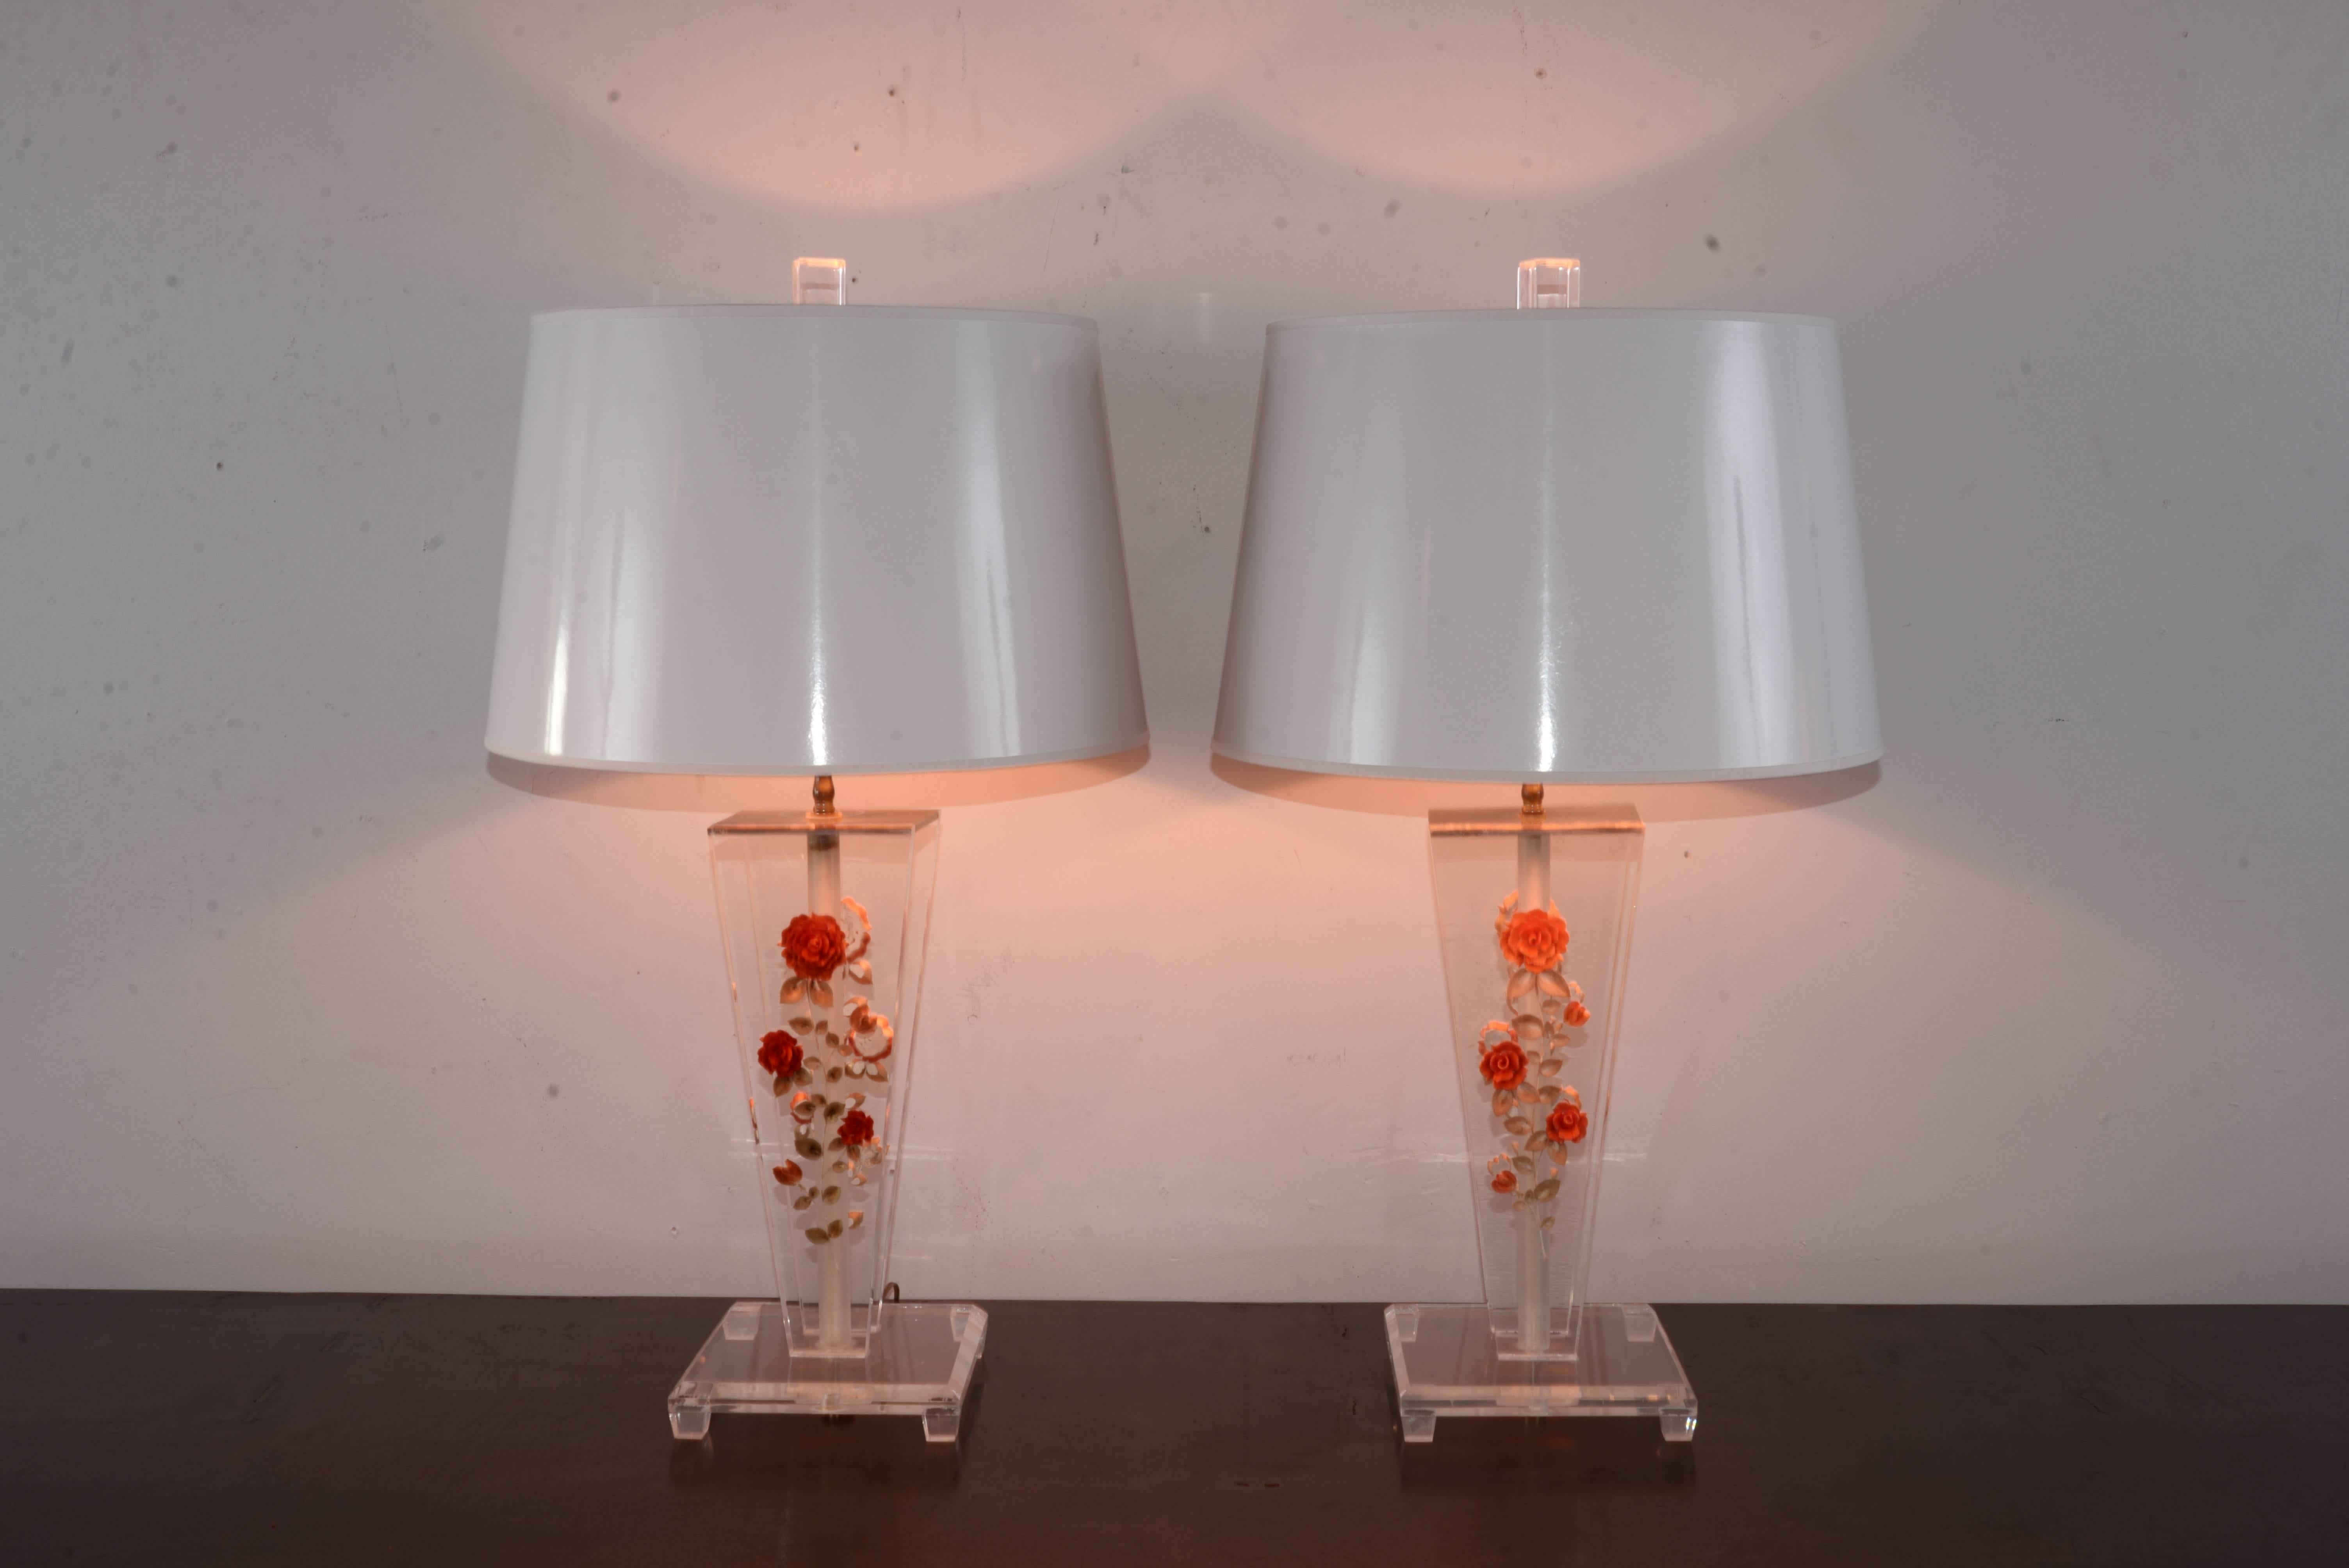 Pair of Lucite table lamps with unique three dimensional flowers embedded in the Lucite. New custom-made white gold lined shades have been added.